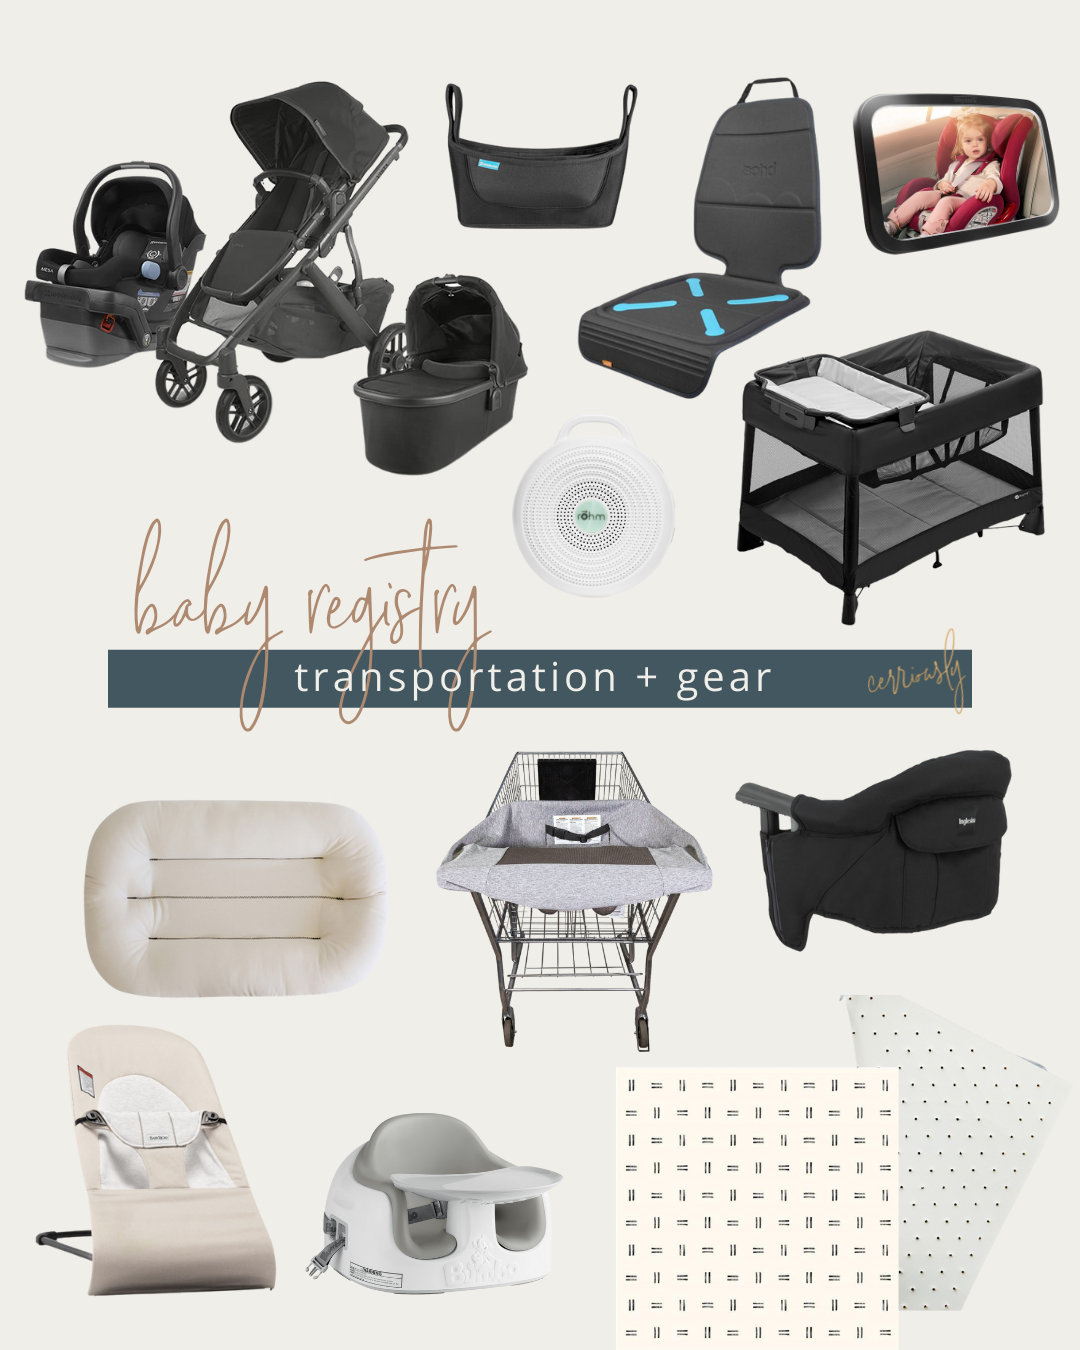 https://images.squarespace-cdn.com/content/v1/6203034fcc210053859f6c88/1649376117853-D4Z45TI6SS0GTD3SPETP/my+baby+registry+with+babylist+-+transportation+%2B+gear.png